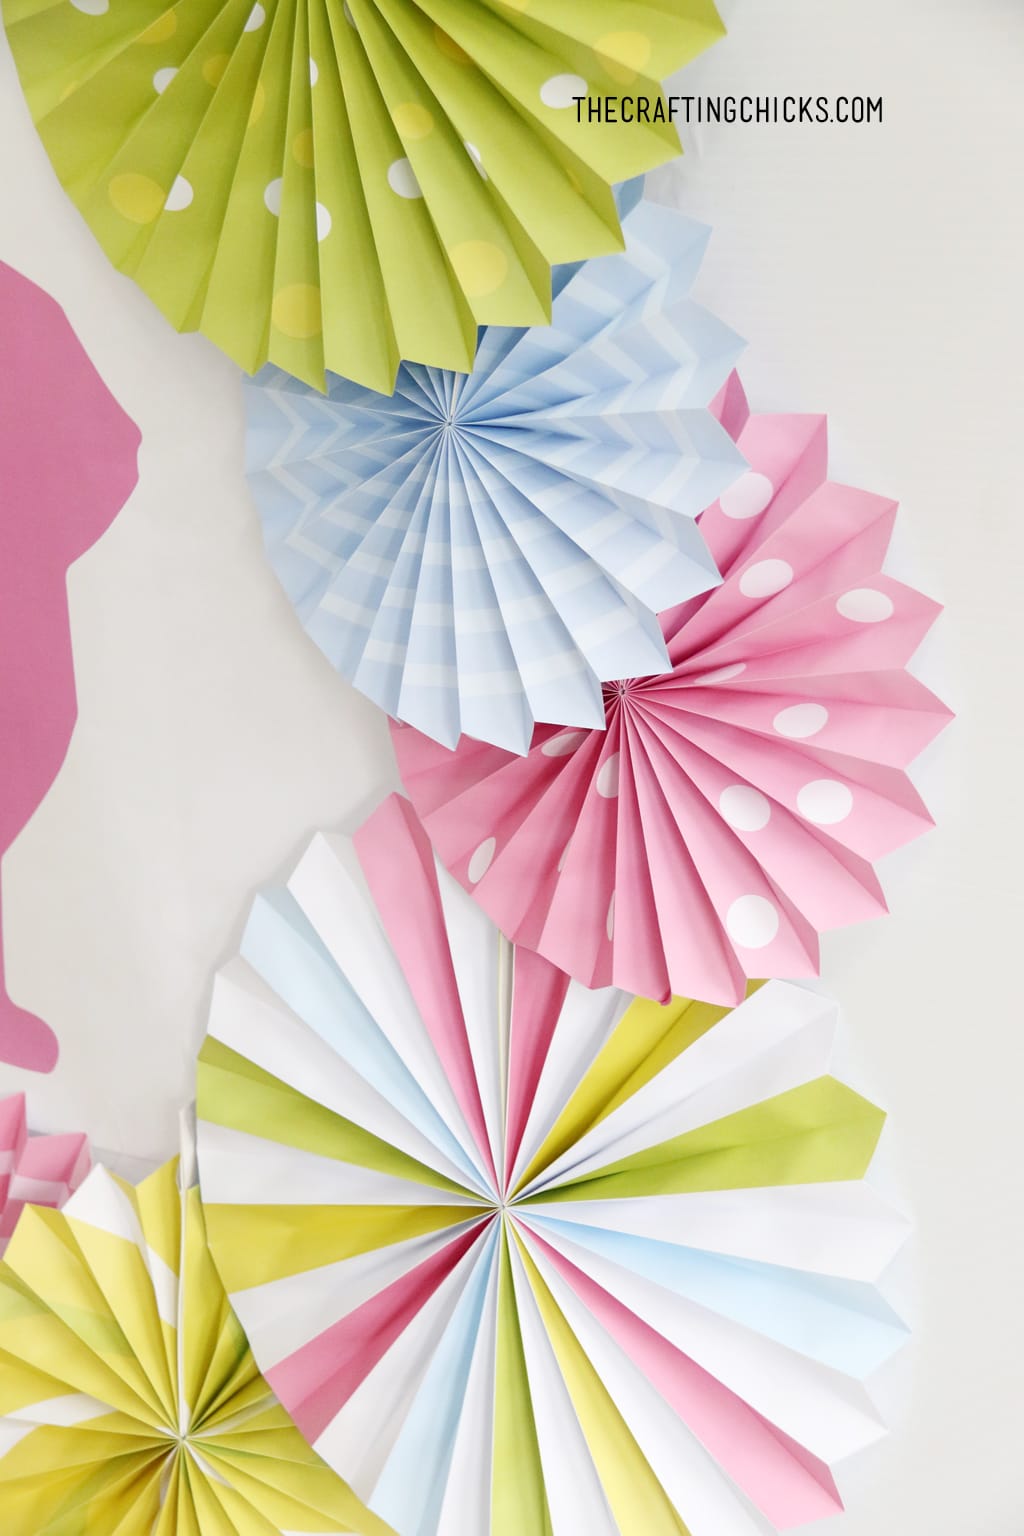 Bright colored decorative paper fans in bright green, pink, yellow and blue.